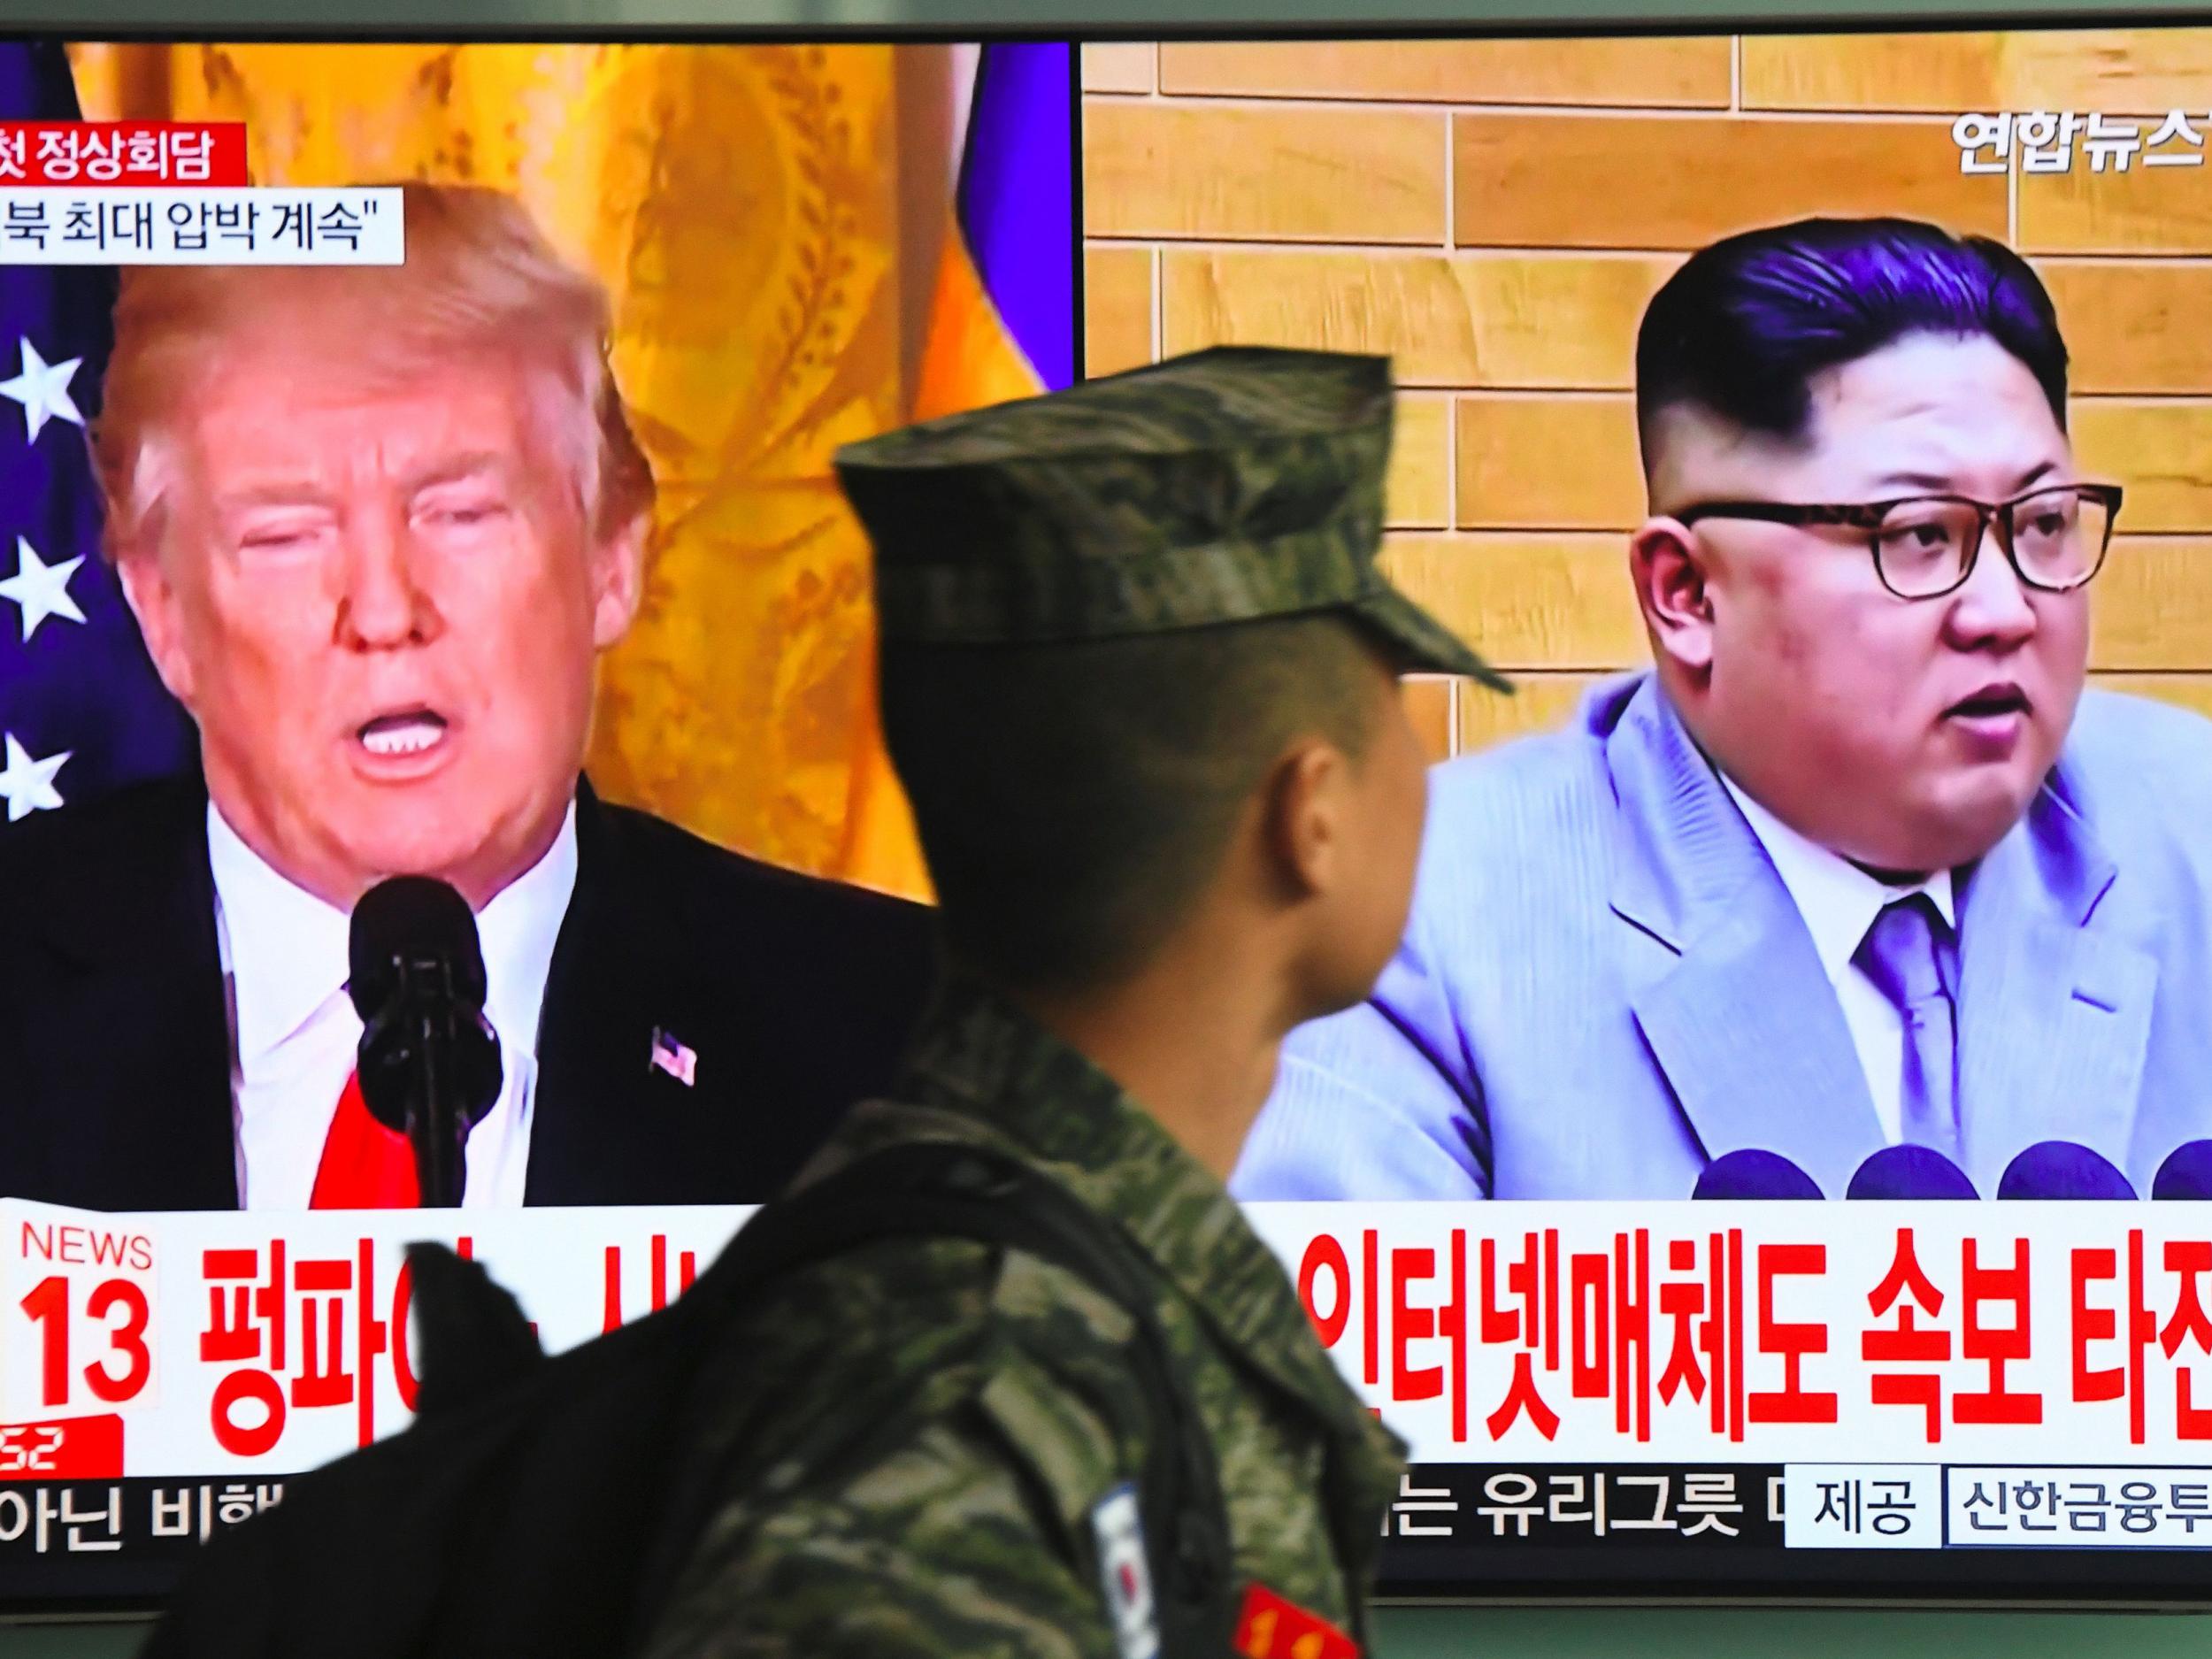 He can’t take full credit for defusing tensions with North Korea – but under President Trump, Kim Jong-un is becoming more receptive to talks with South Korea